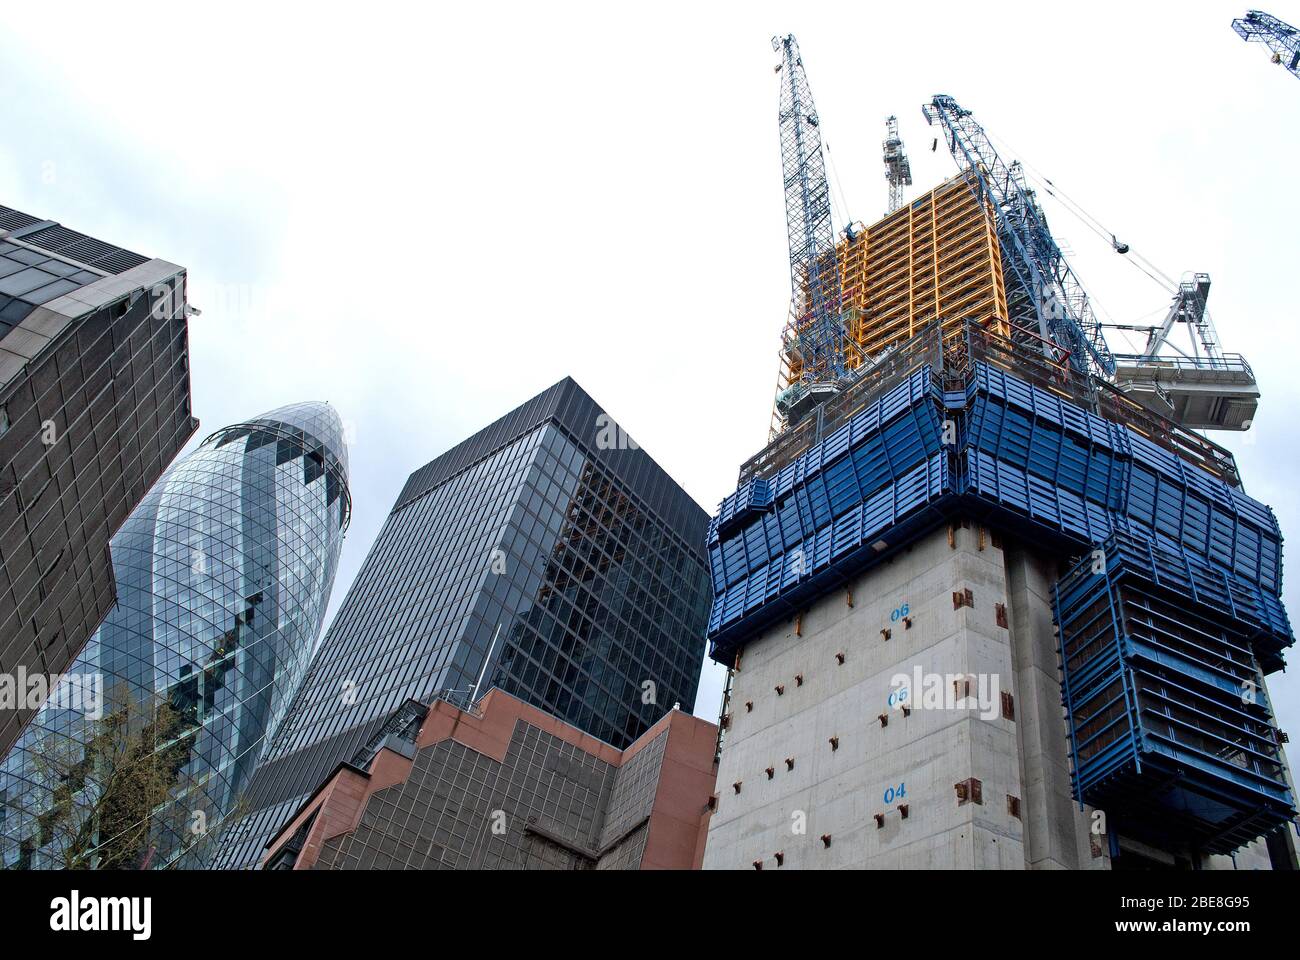 Towers Under Construction Steel Concrete Cranes Frame Structure Engineering 30 St. Mary Axe Gherkin in Aldgate, City of London Stock Photo